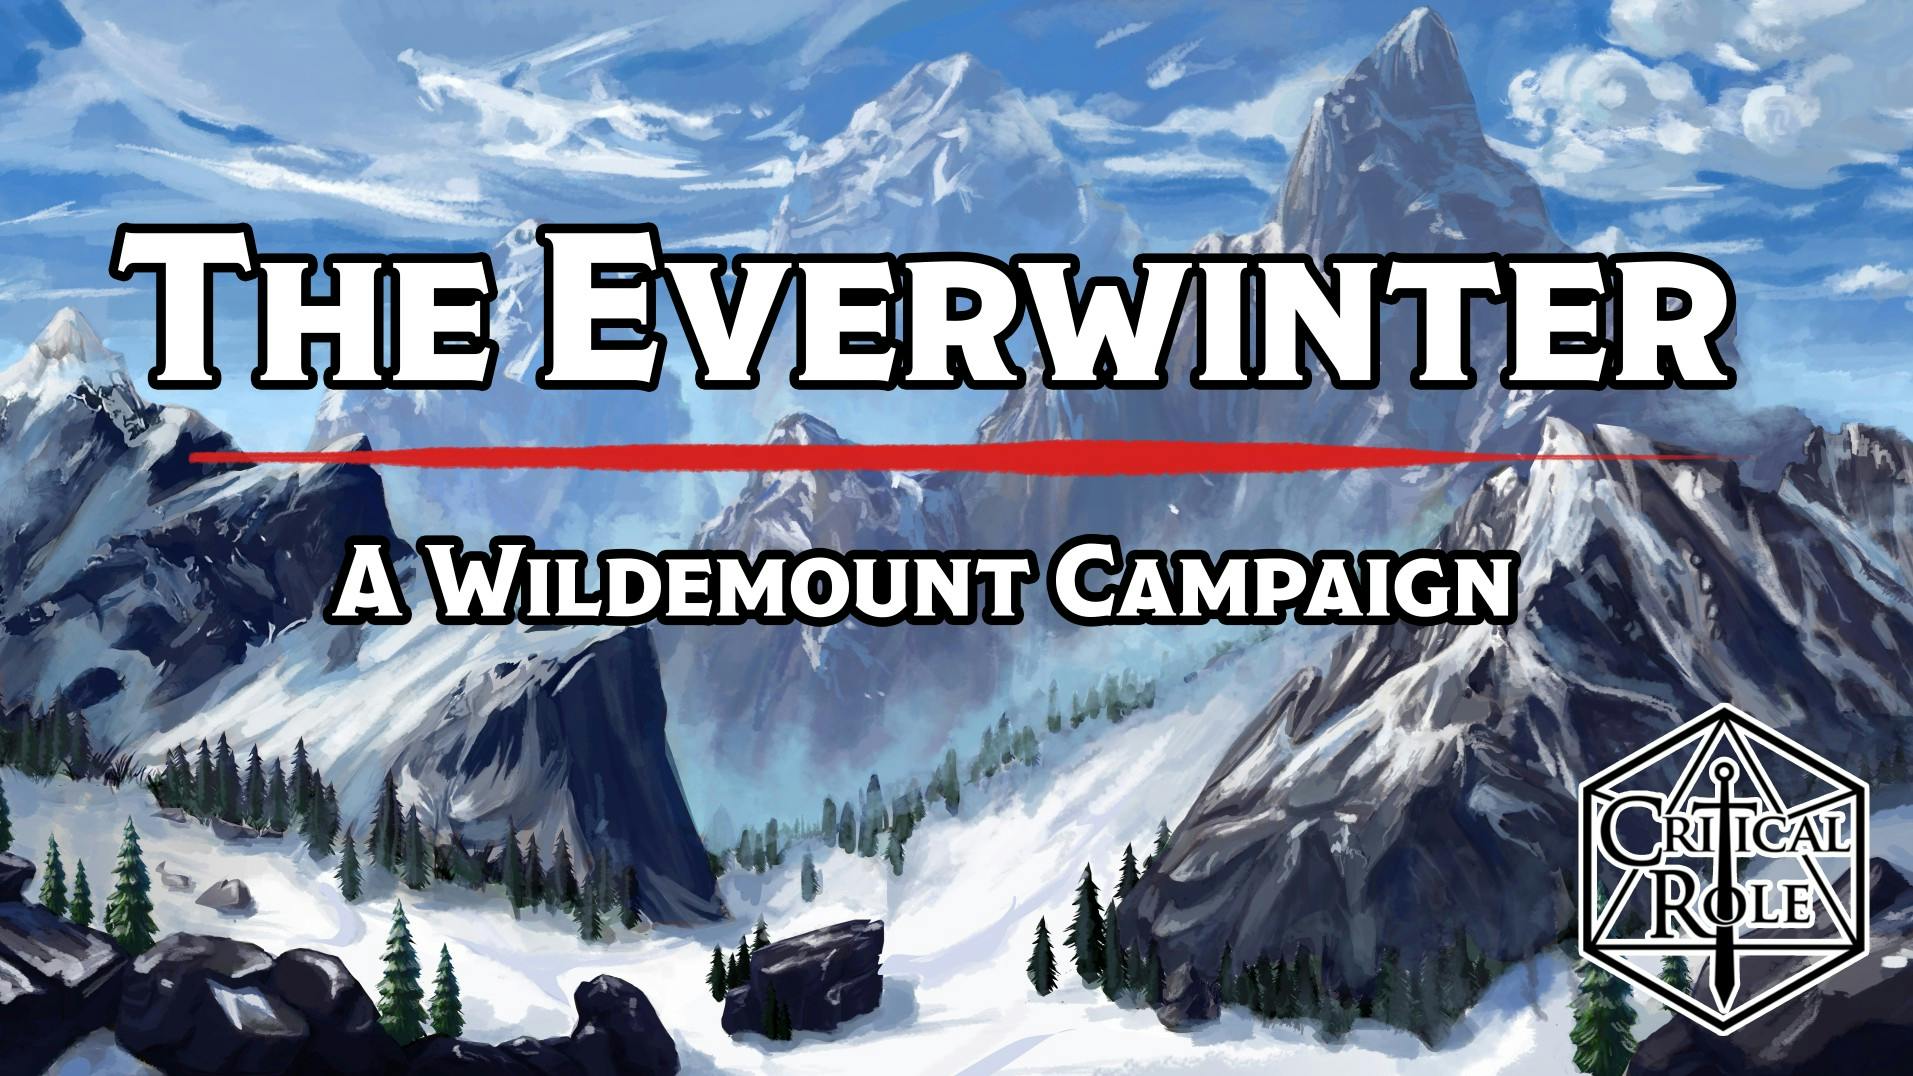 The Everwinter / Wildemount / Character focused Campaign